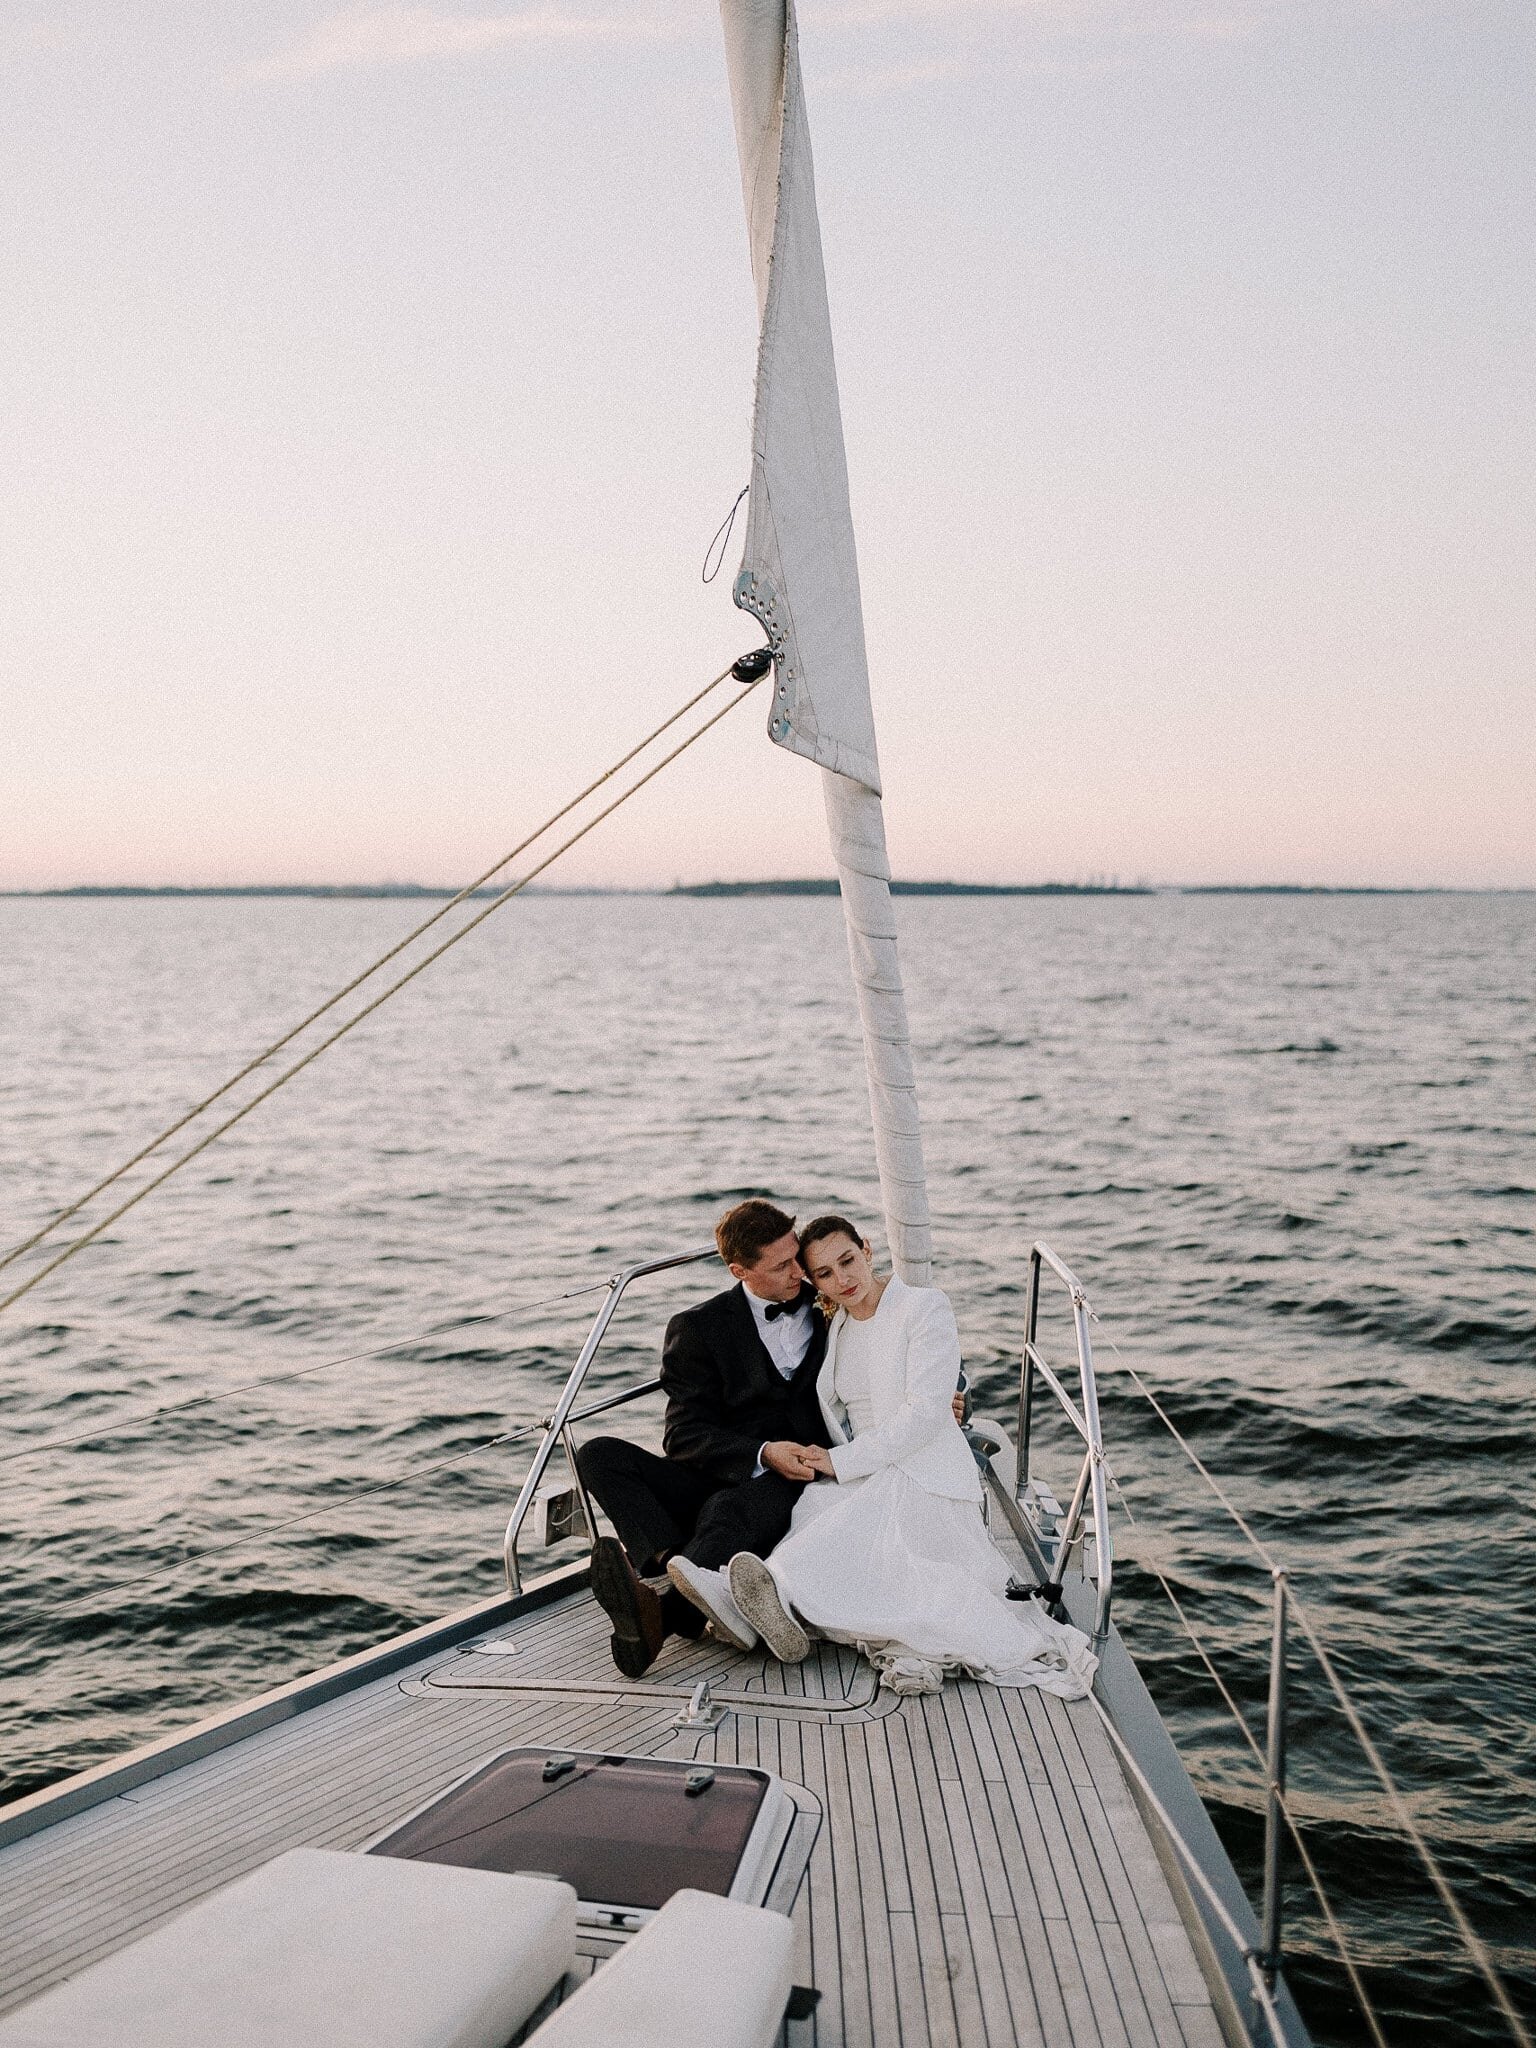 Couple sitting in sailboat after the sunset